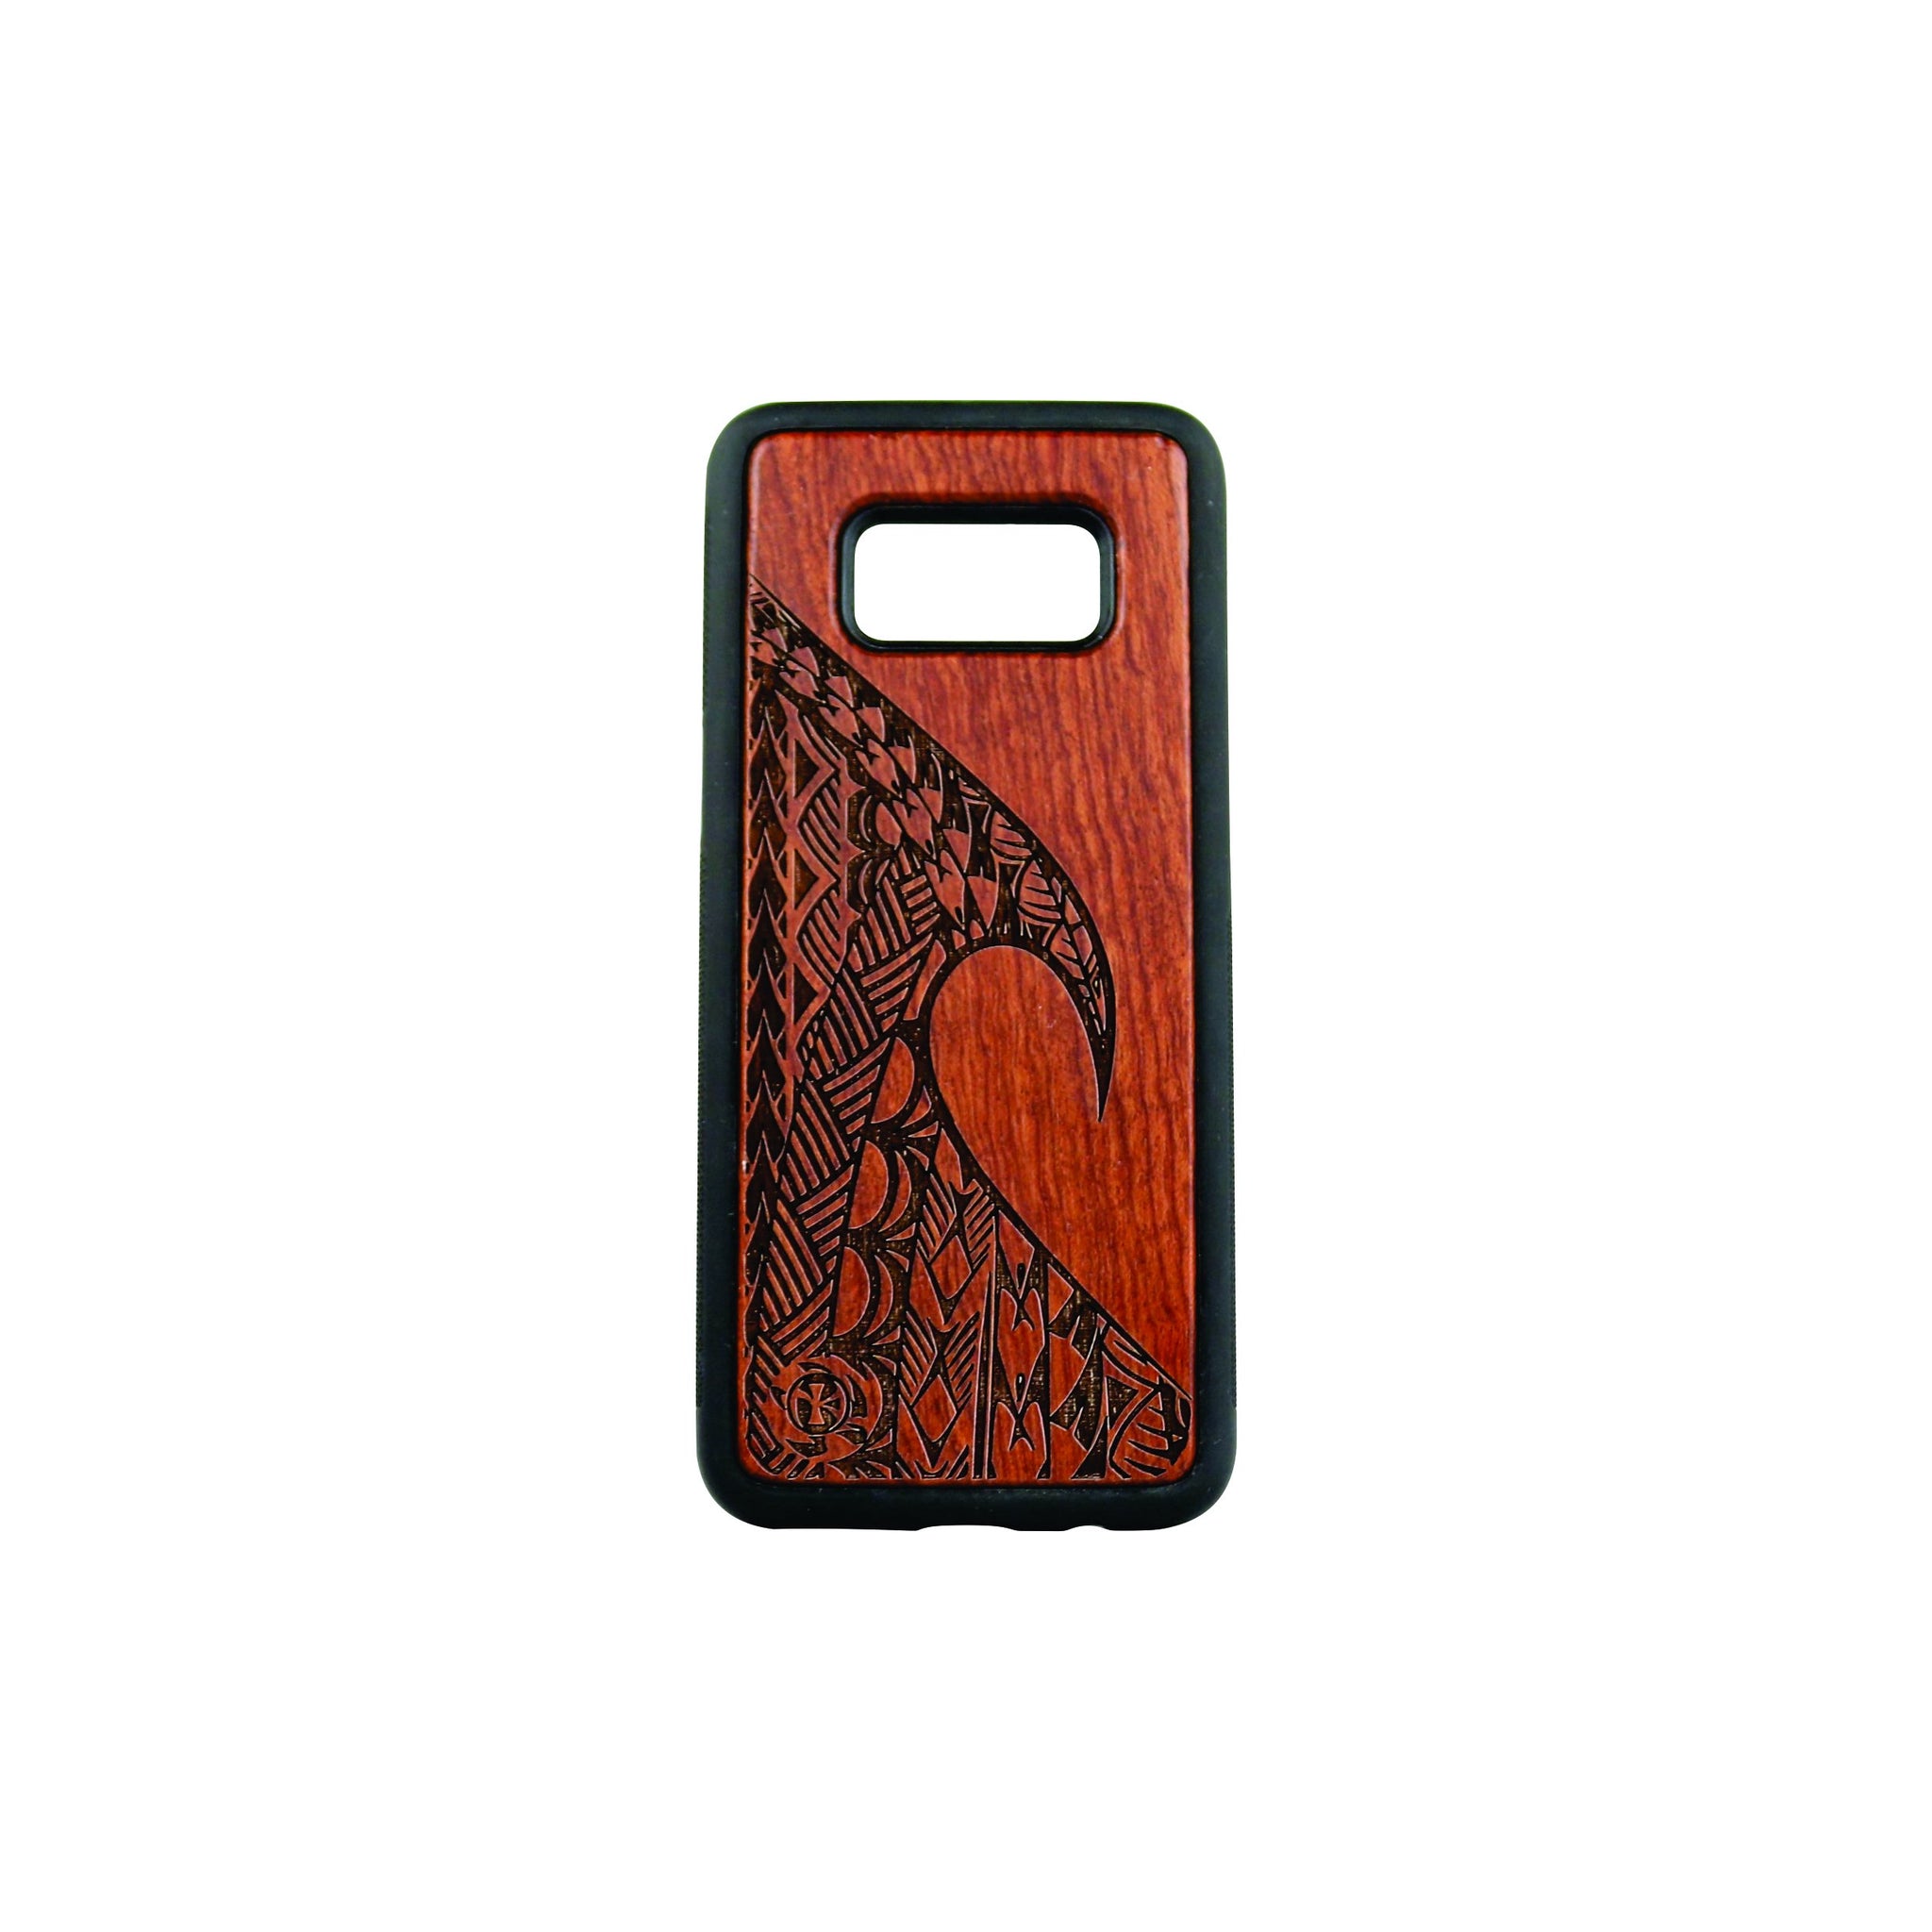 Samsung Galaxy S8 - Wood Phone Cover - Waves of the Pacific - Toka Creates